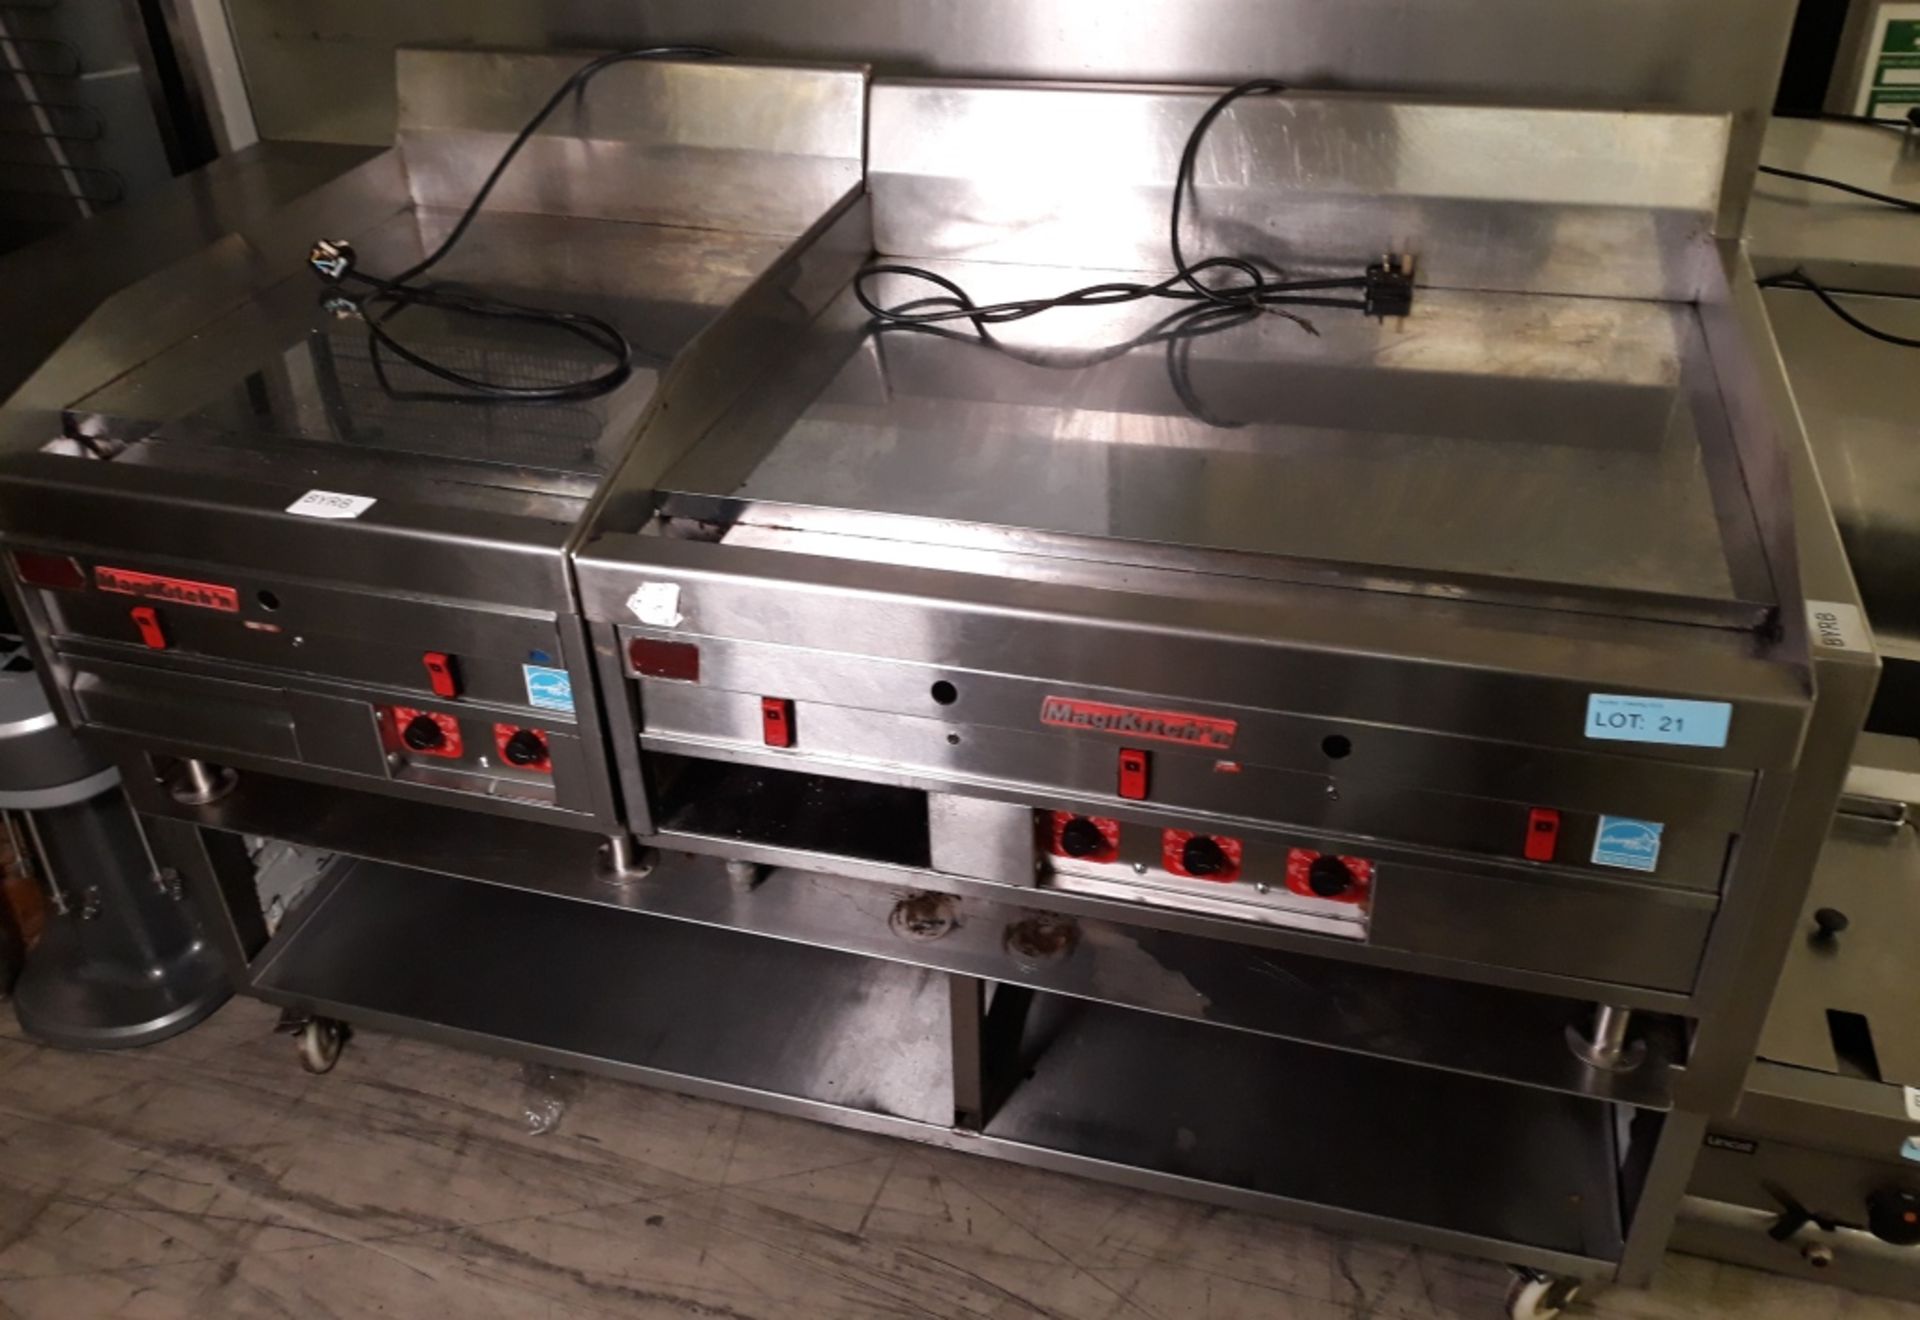 MagiKitch'n large double gas griddle in moveable workstation.